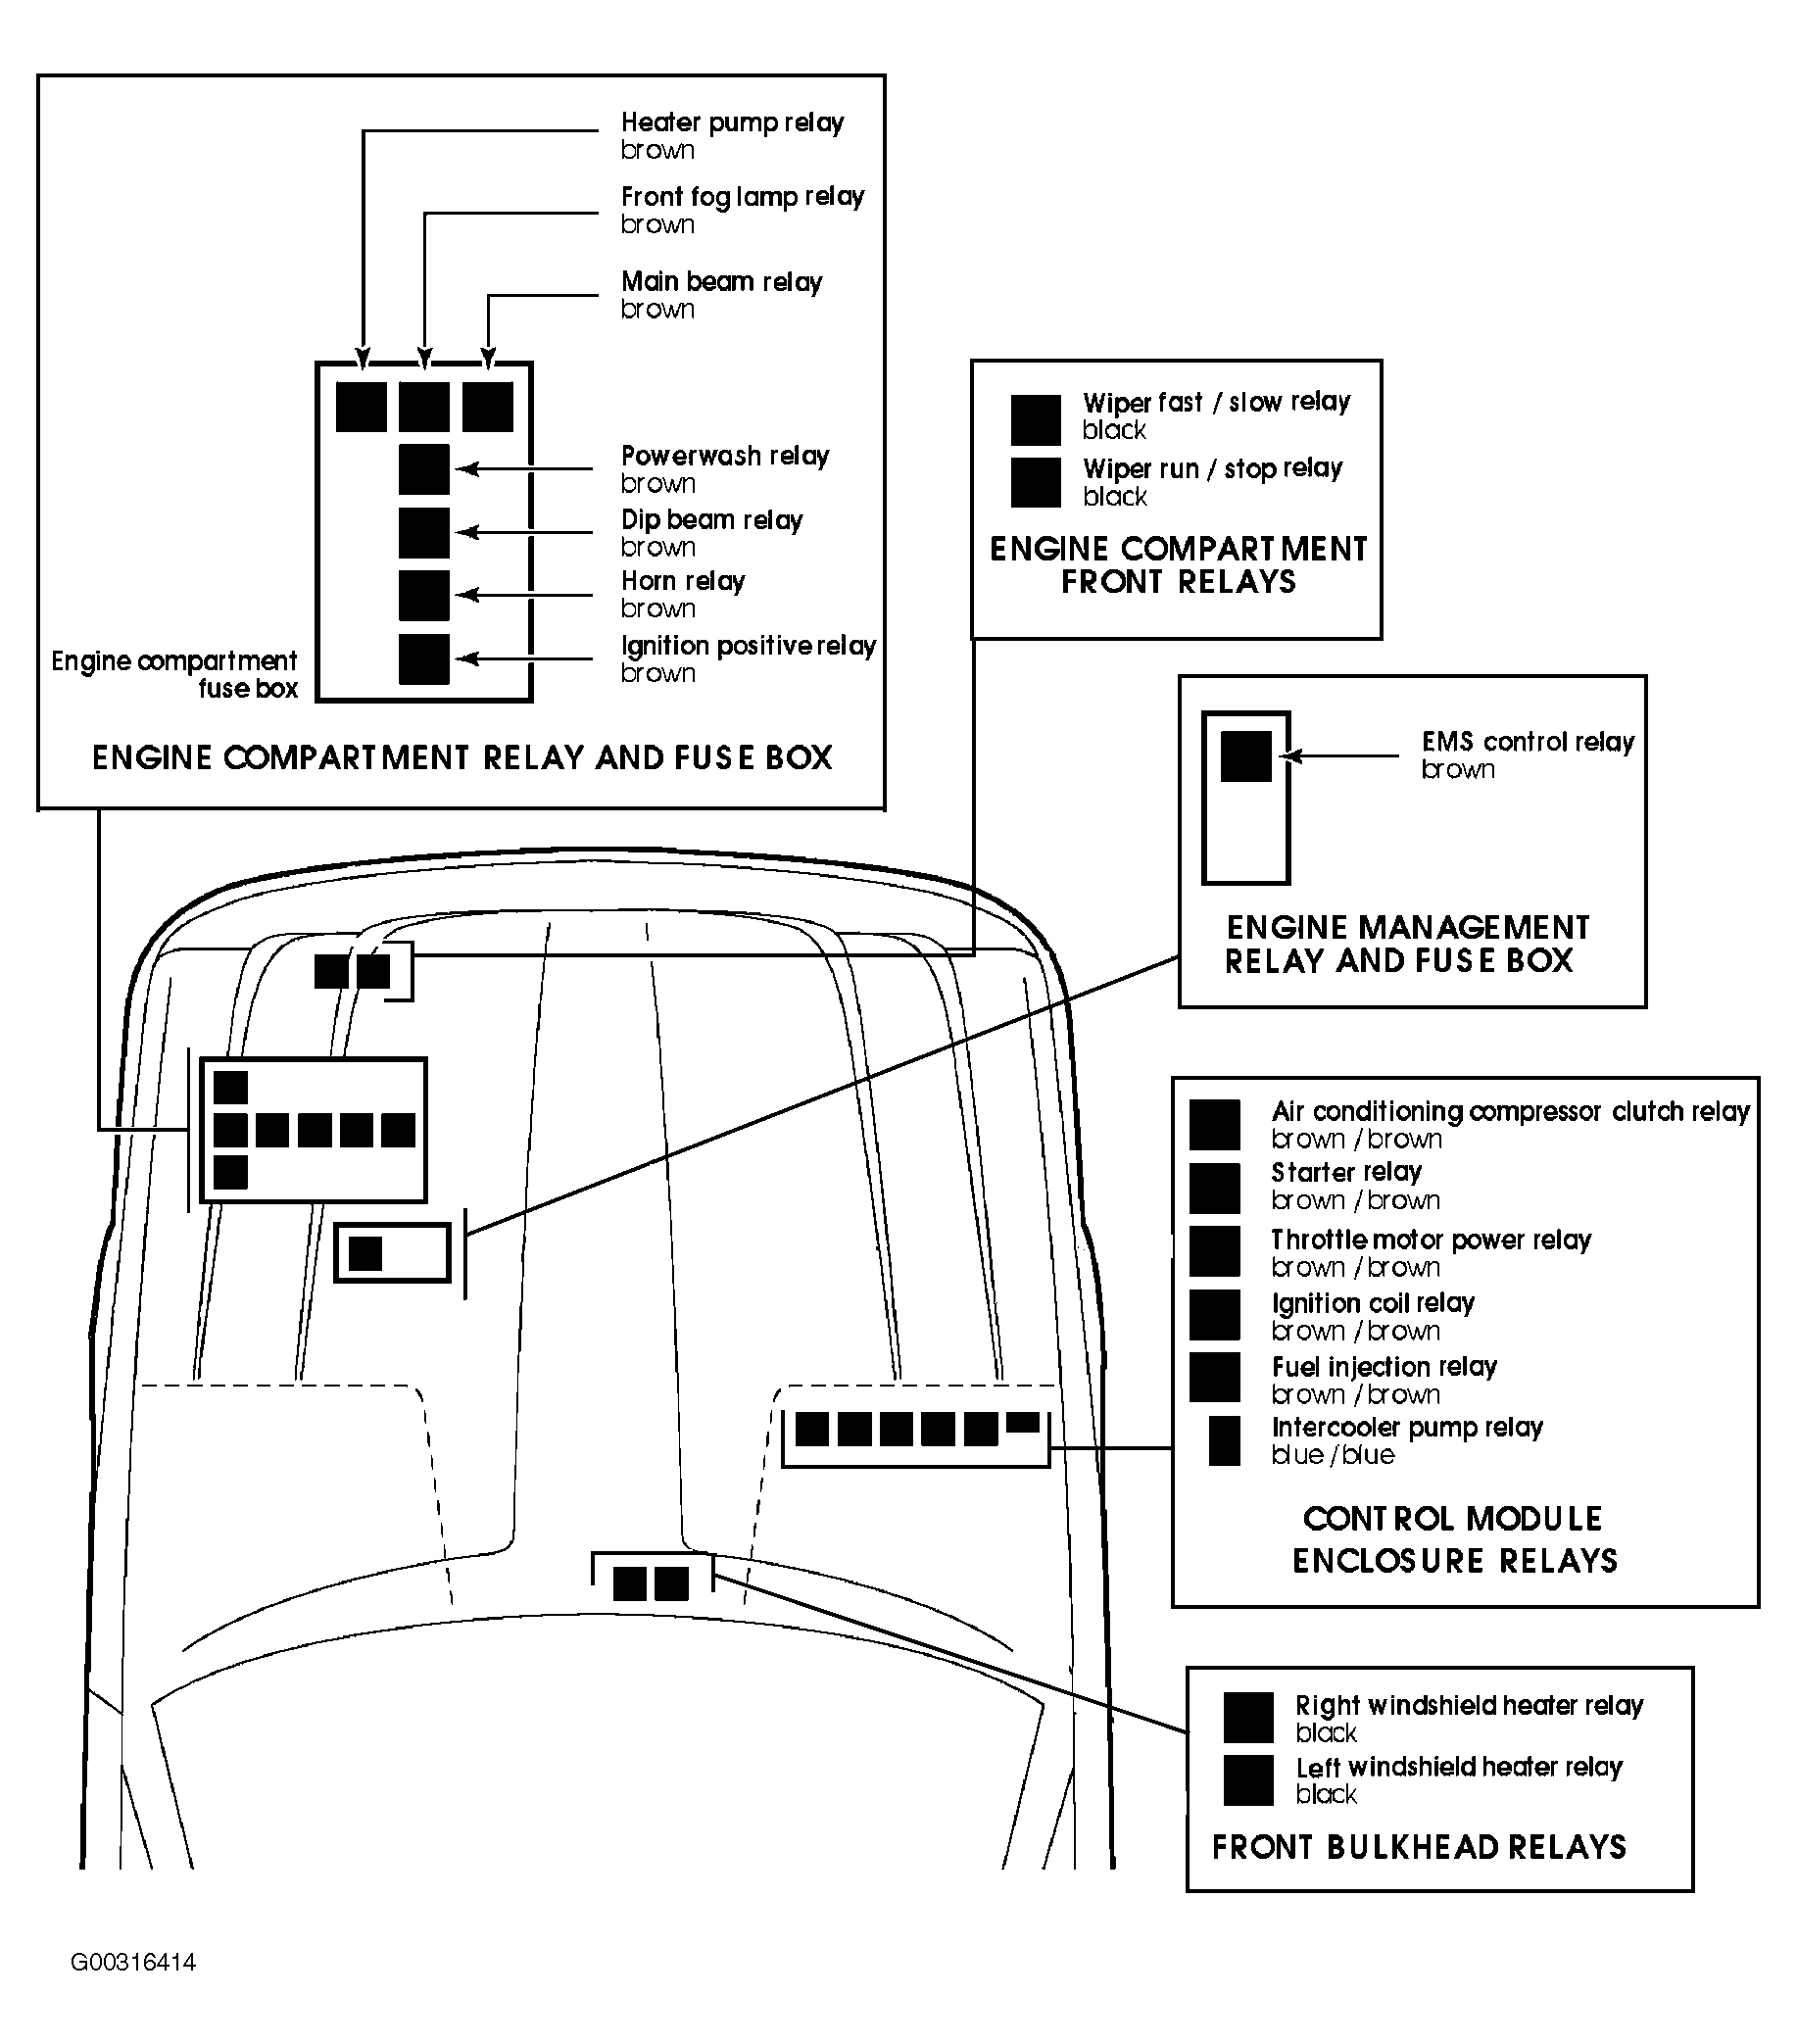 Jaguar XJ8 1998 - Component Locations -  Identifying Engine Compartment Fuse/Relay Locations